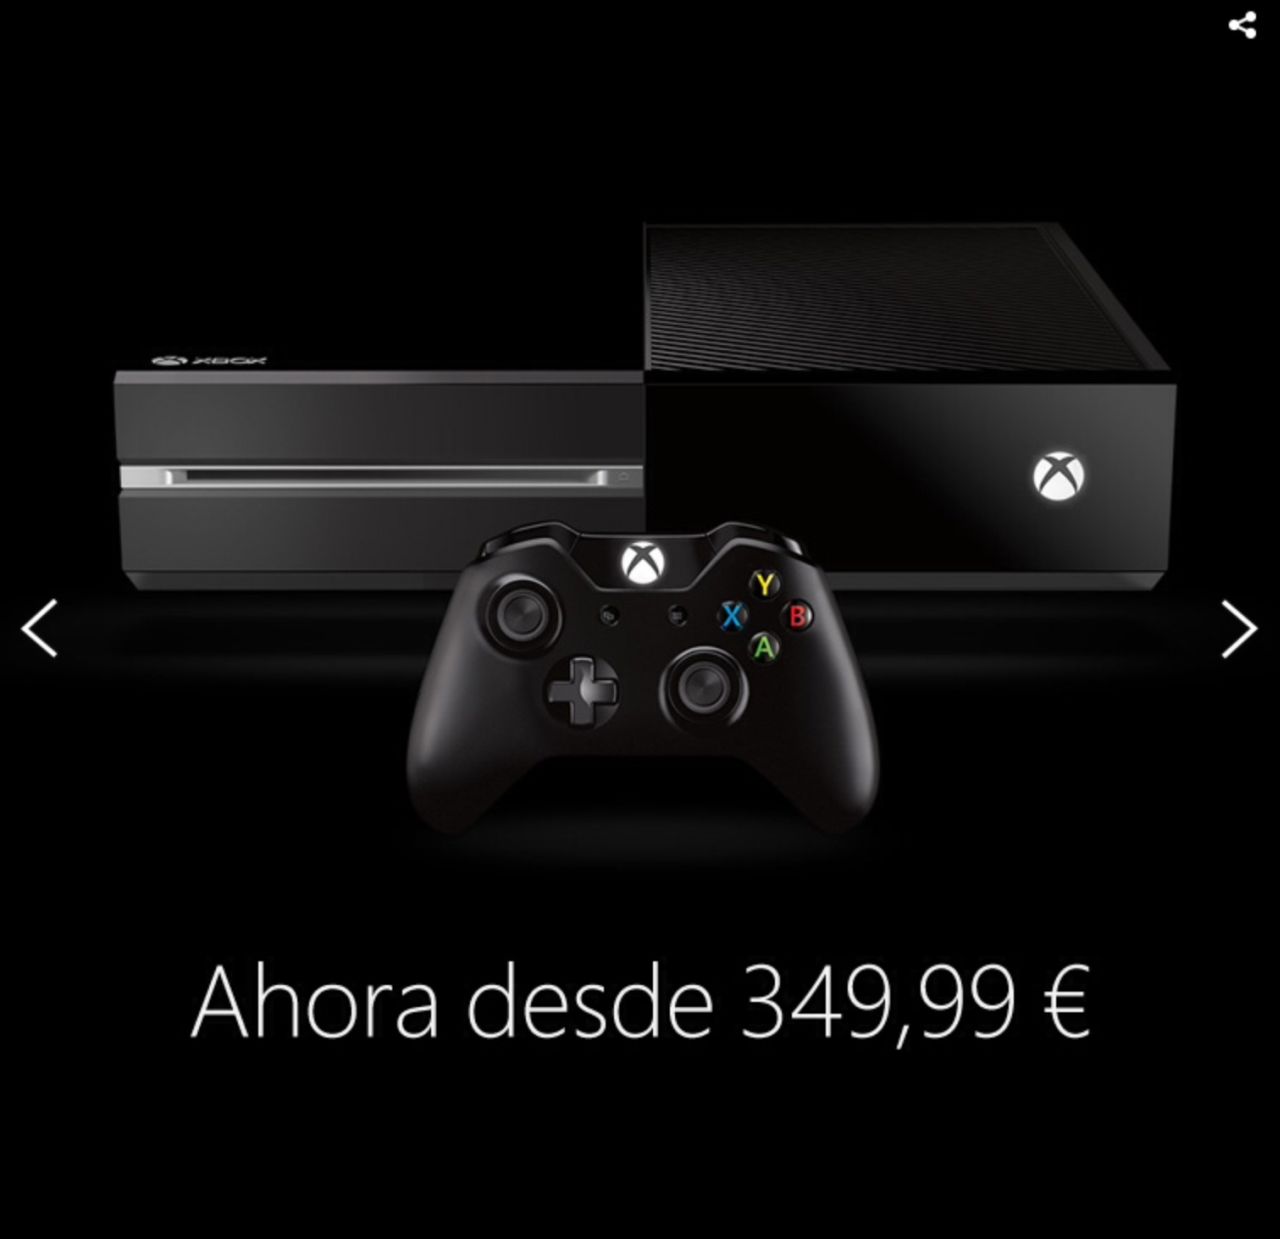 Apparently Unforgettable Symphony Xbox One Price Might Be Cut to 349.99 Euro (469 Dollars) – Report